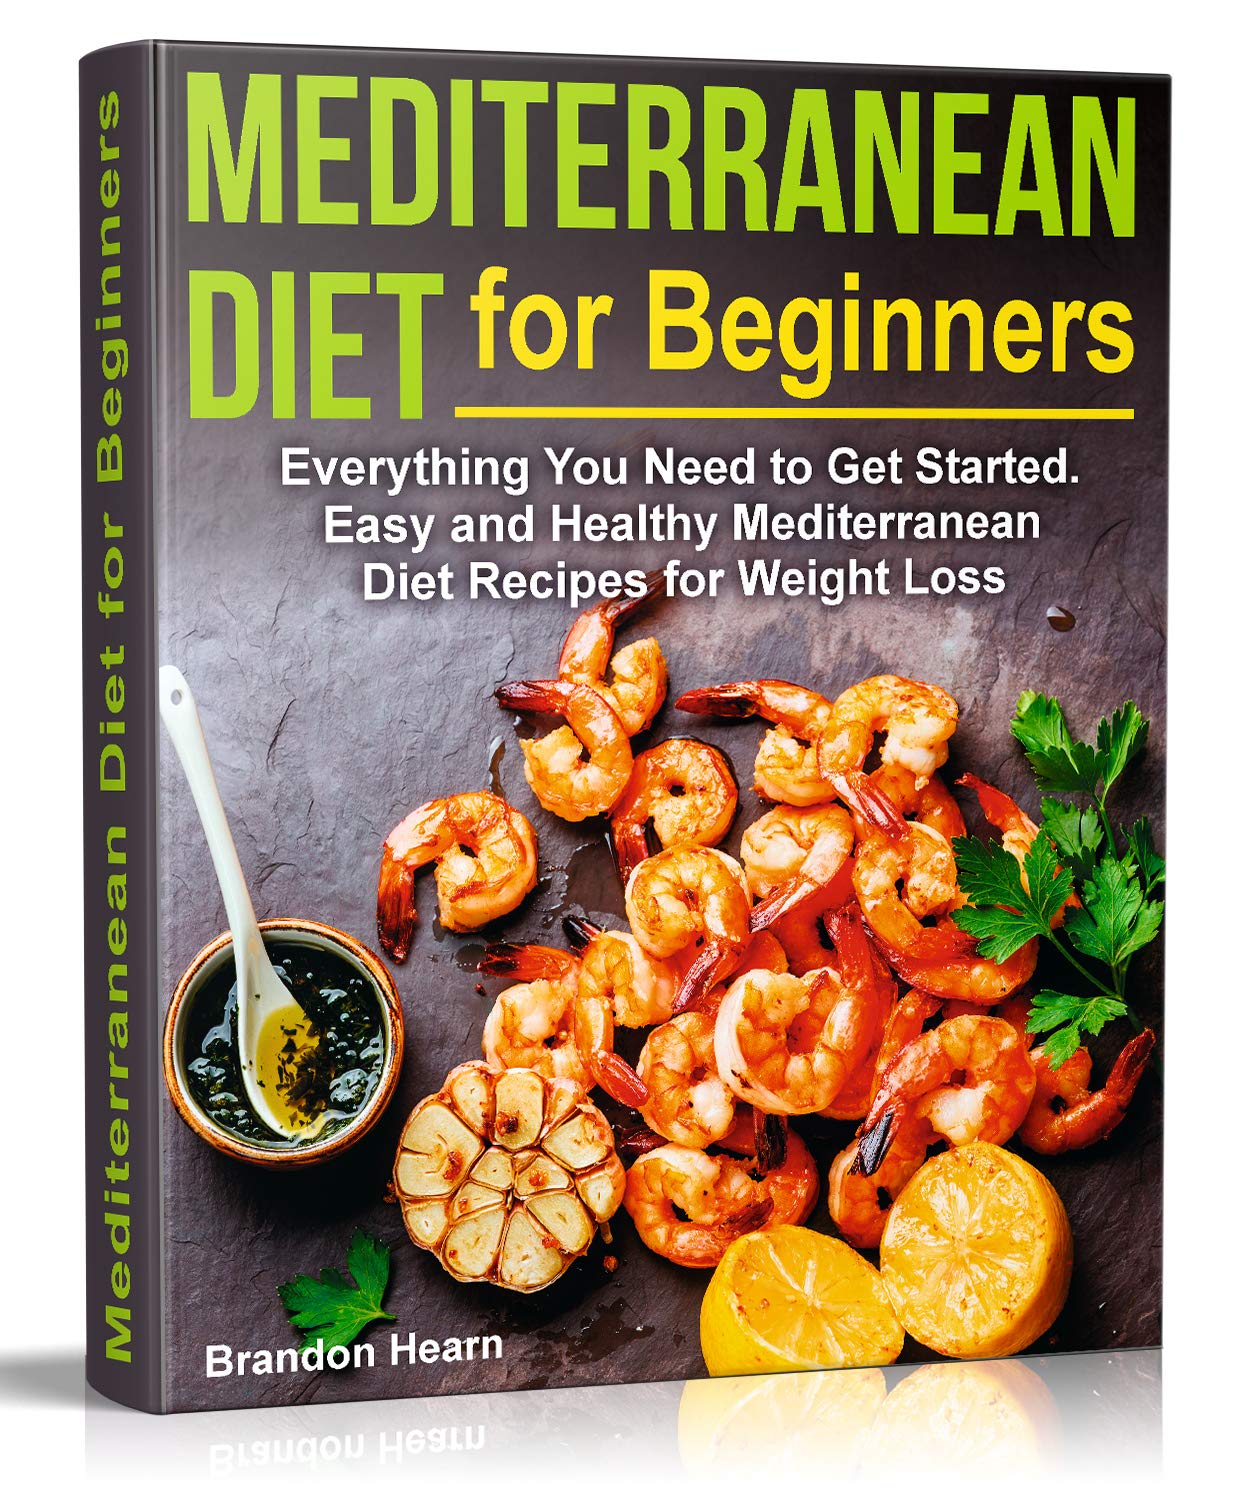 Book Cover Mediterranean Diet for Beginners: Everything You Need to Get Started. Easy and Healthy Mediterranean Diet Recipes for Weight Loss